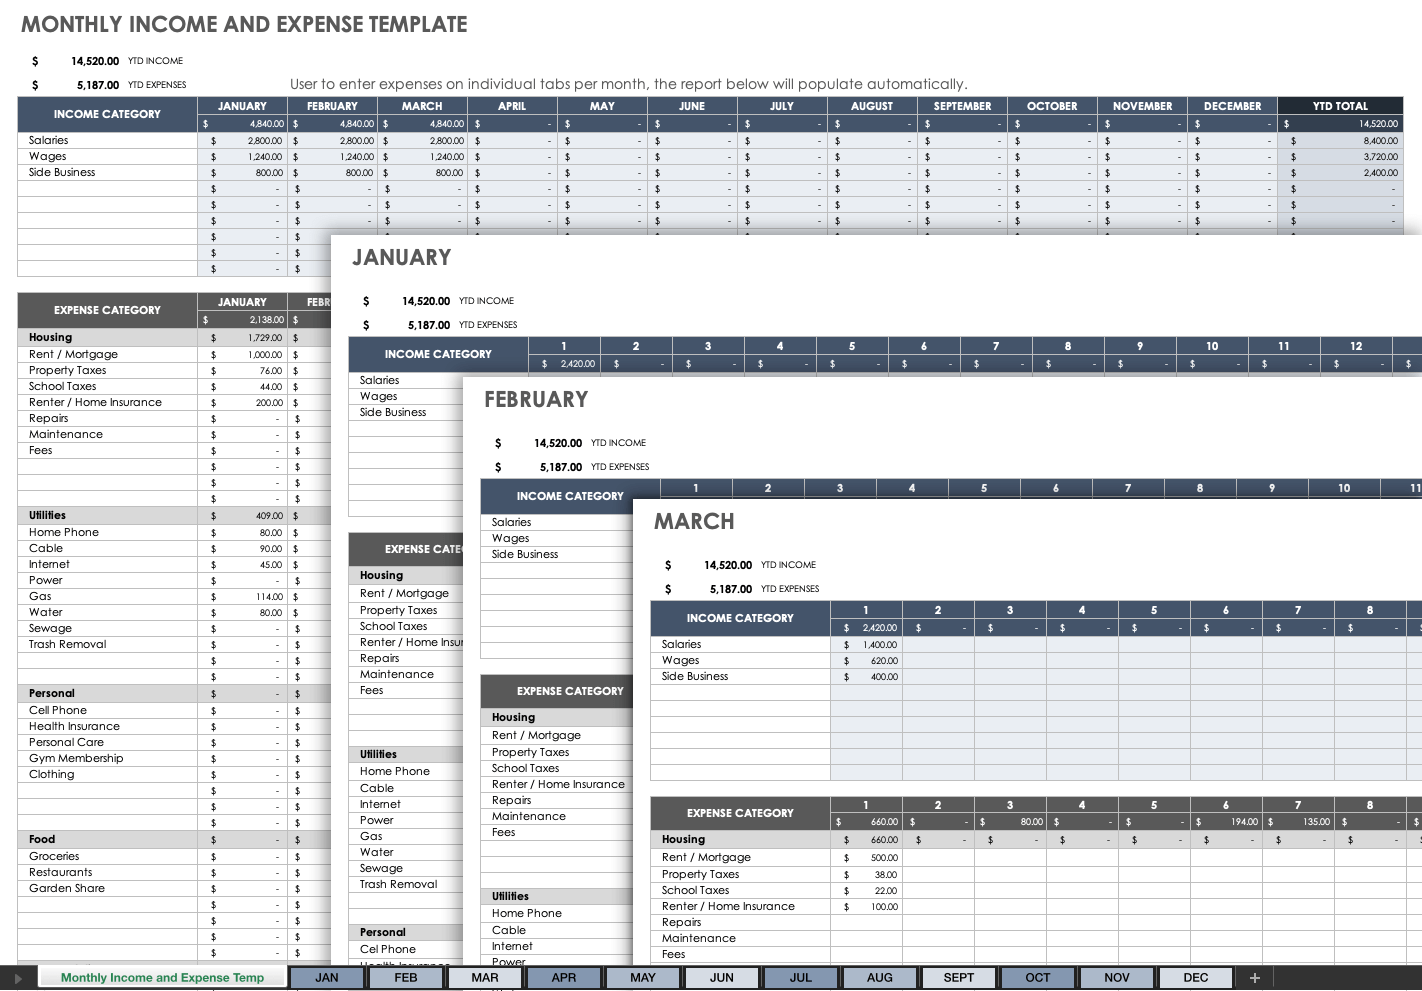 Monthly Income and Expense Template